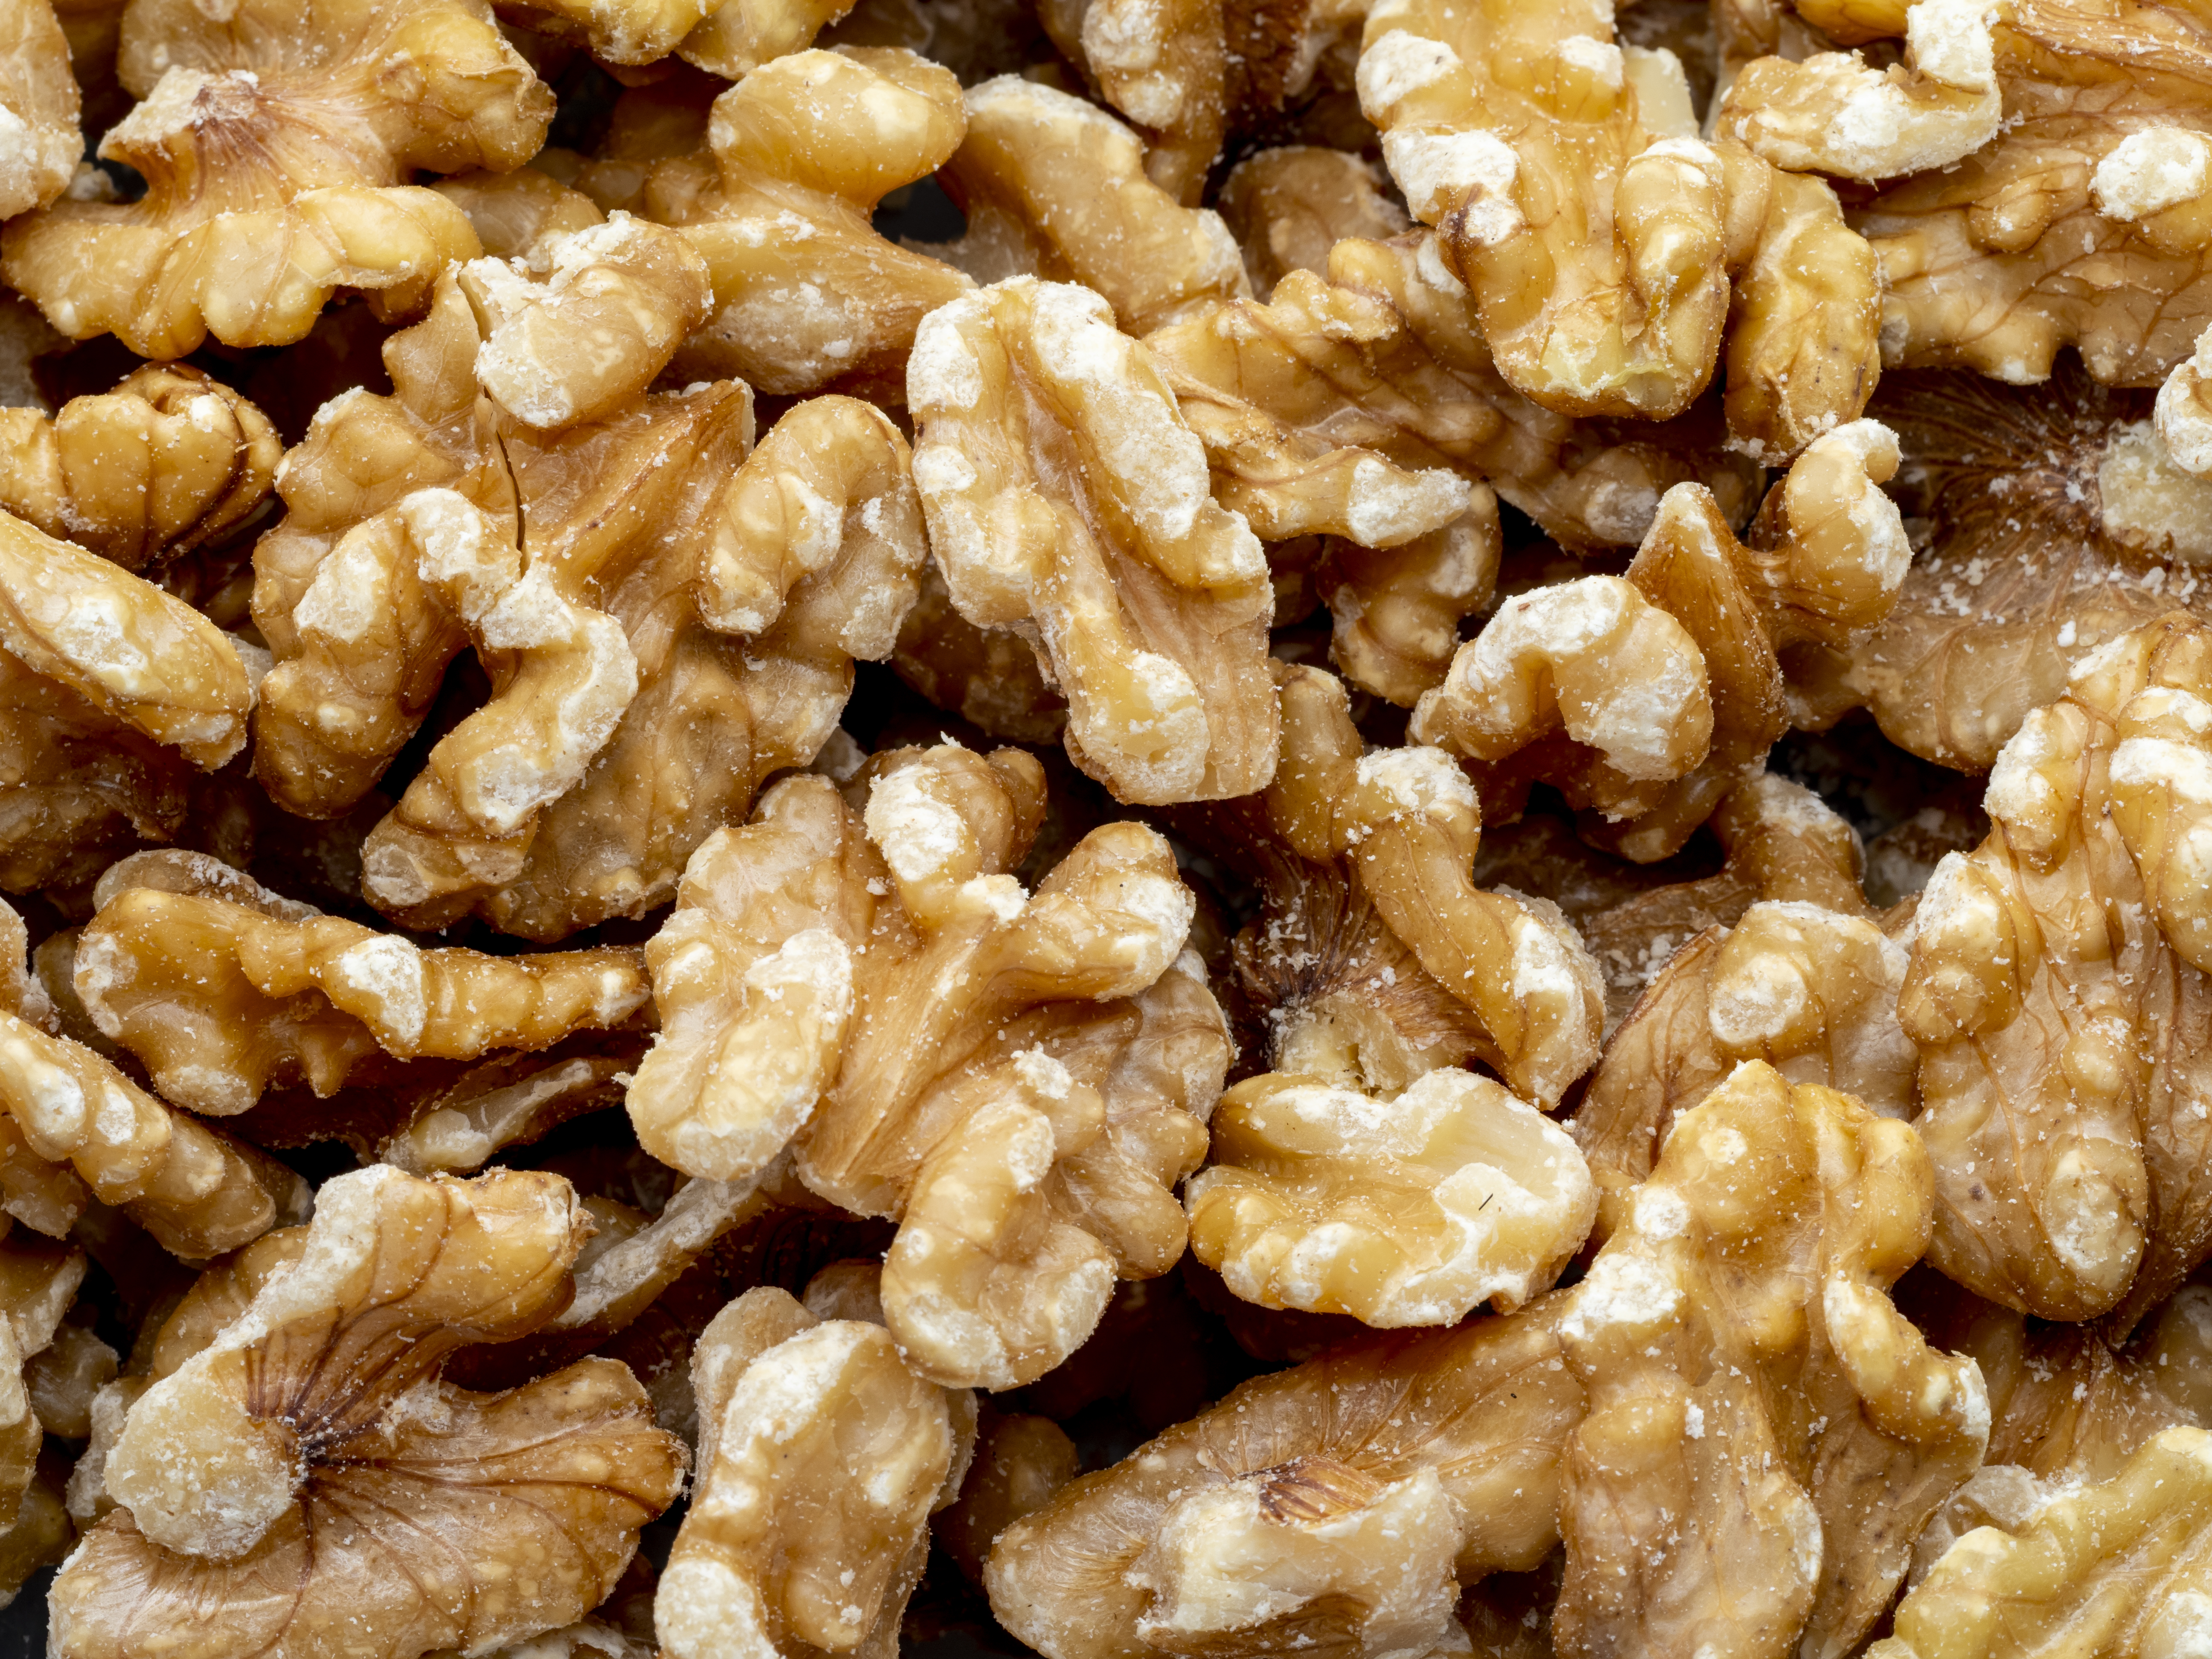 Organic Walnuts Are Linked To A Dangerous E. Coli Outbreak